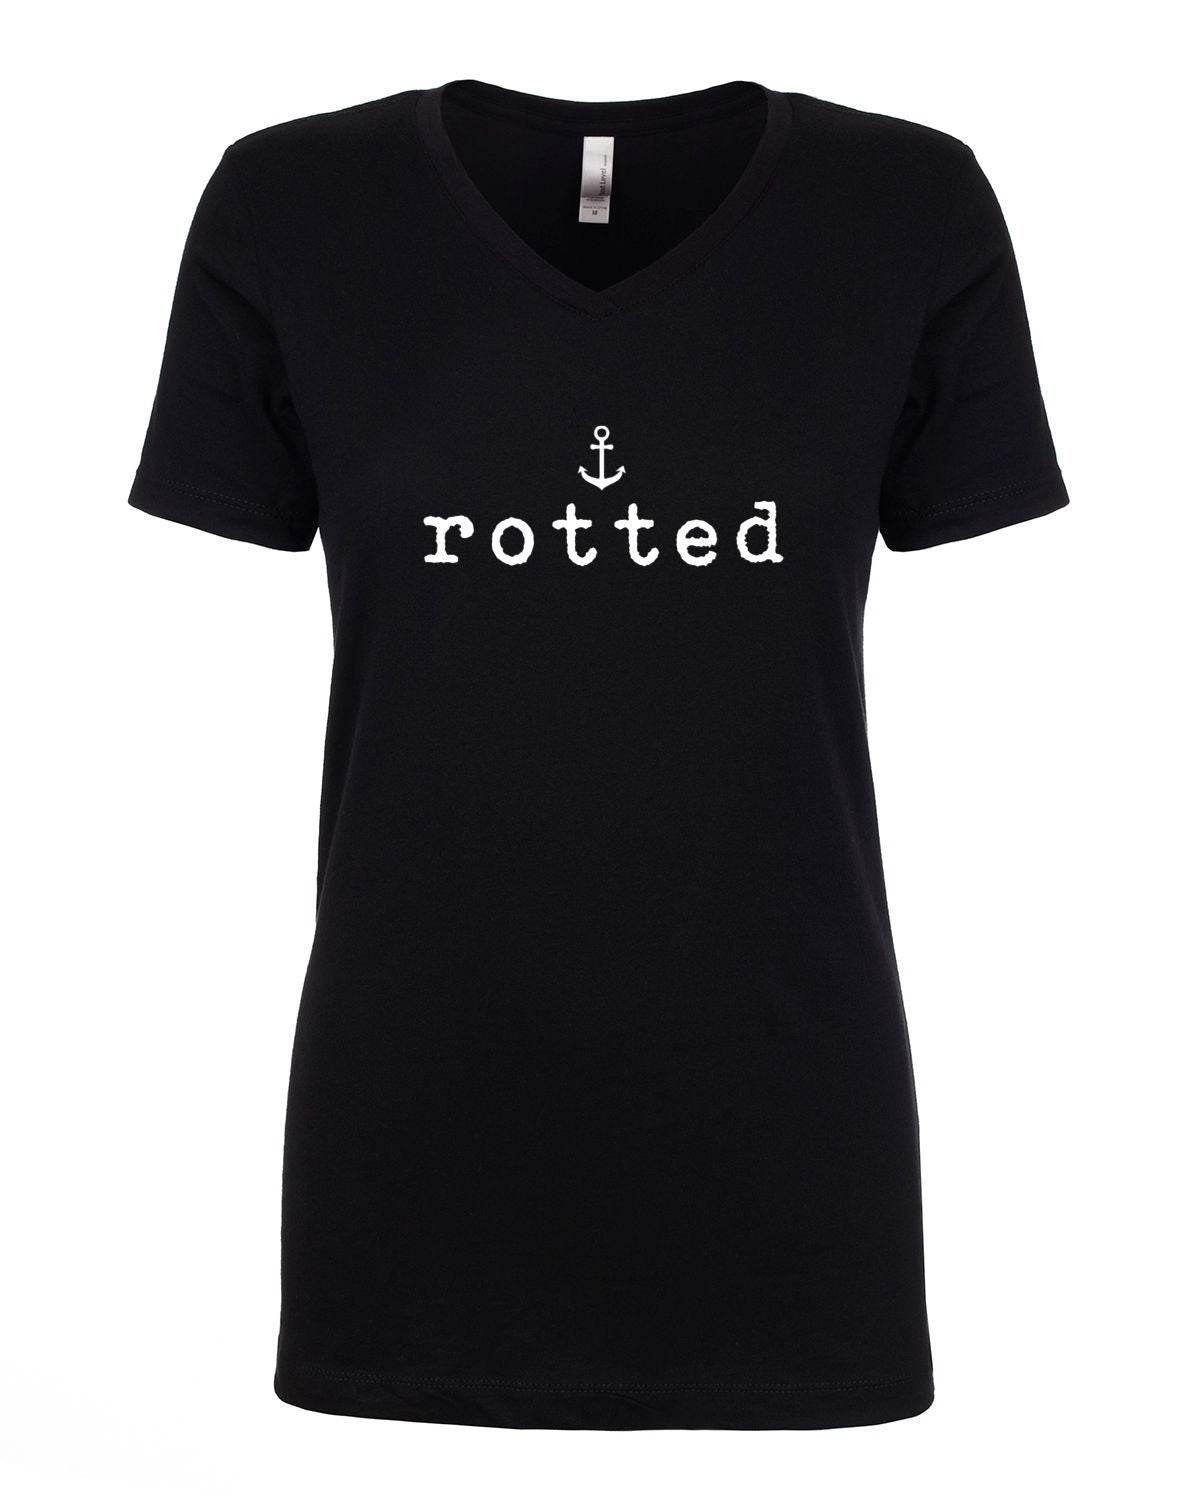 "Rotted" T-Shirt